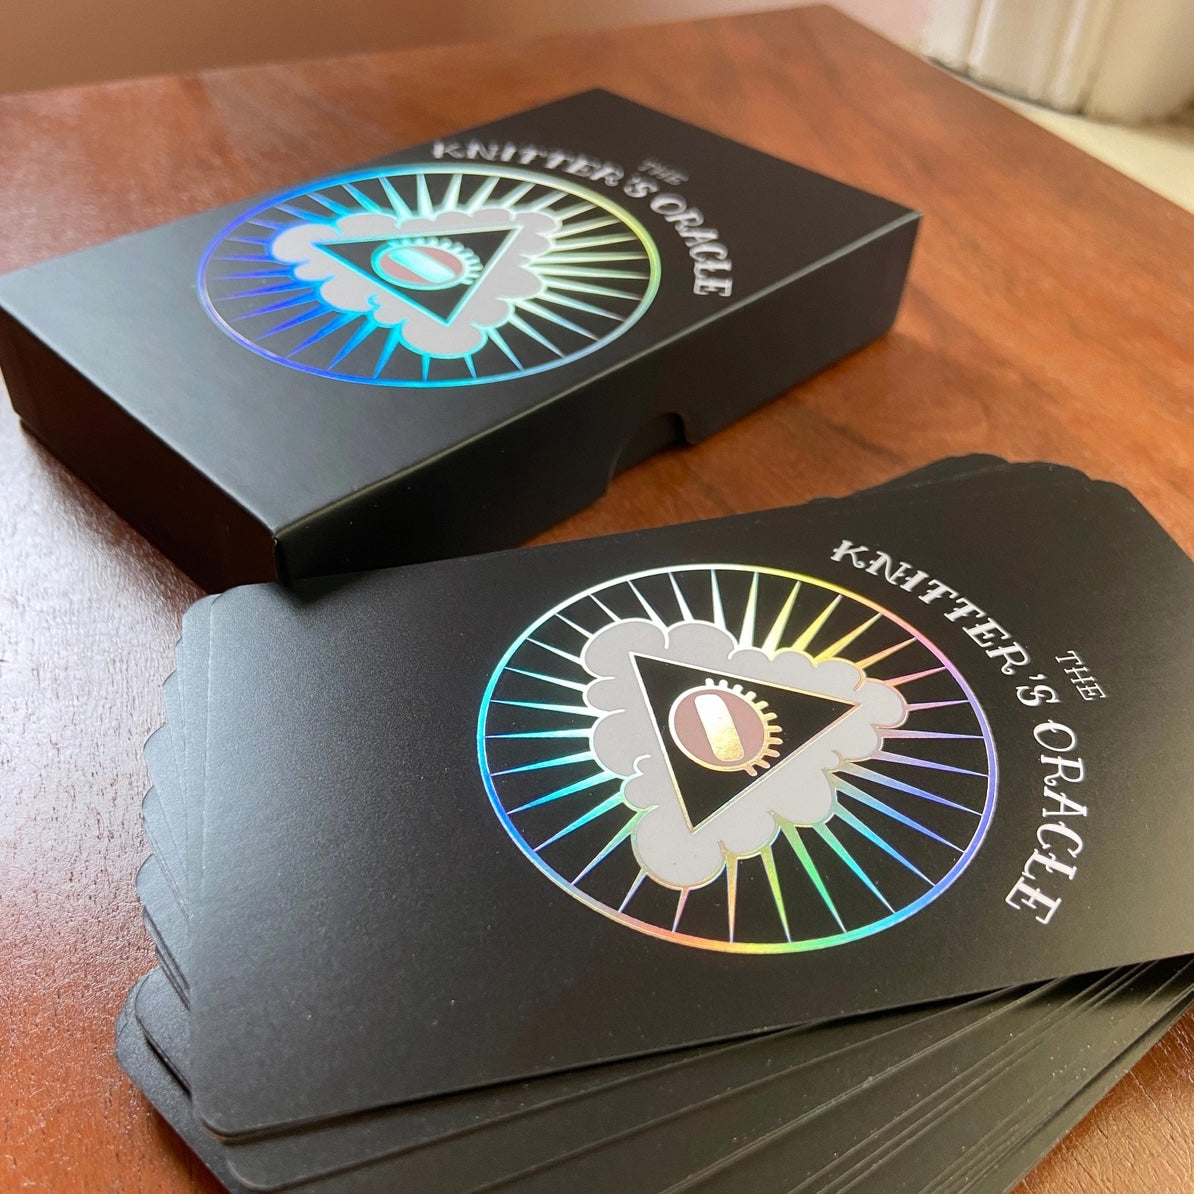 The Knitter's Oracle - Holographic Version cards